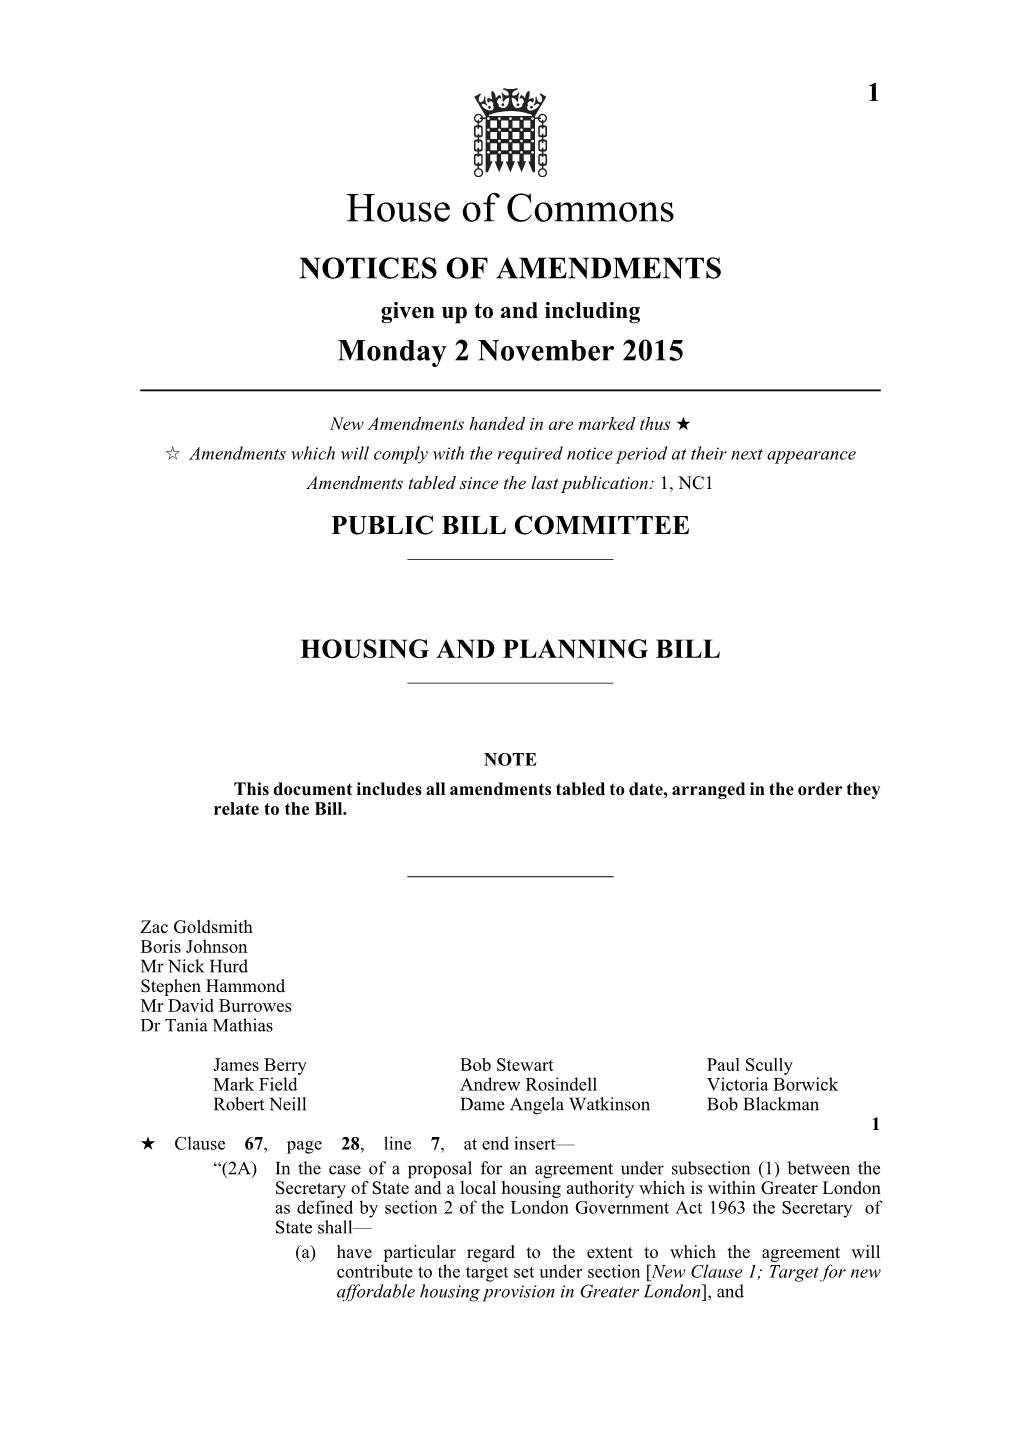 Public Bill Committee Housing and Planning Bill